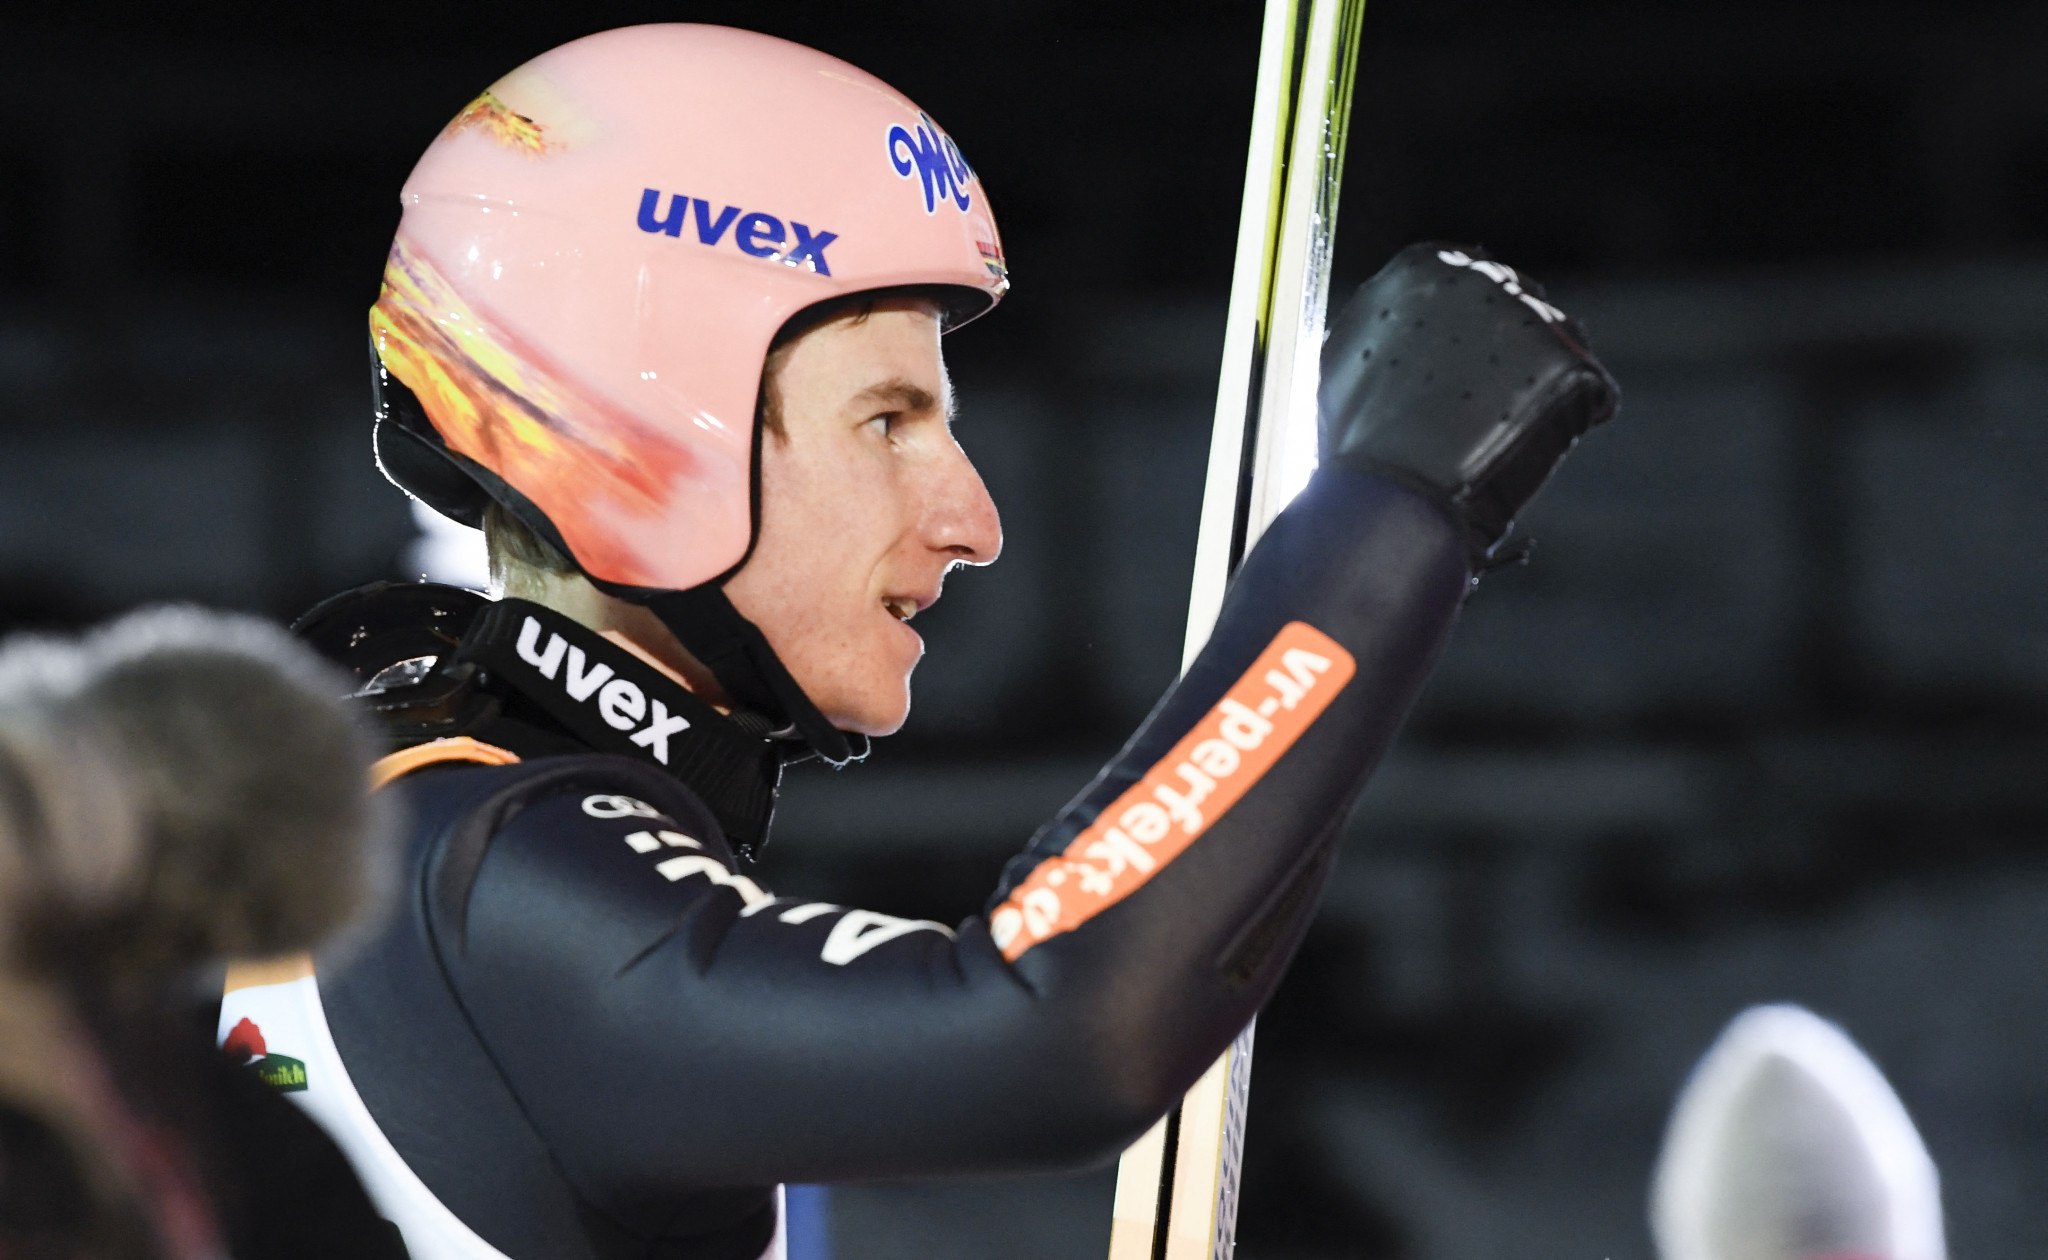 Geiger wins again at Titisee-Neustadt Ski Jumping World Cup to extend overall lead